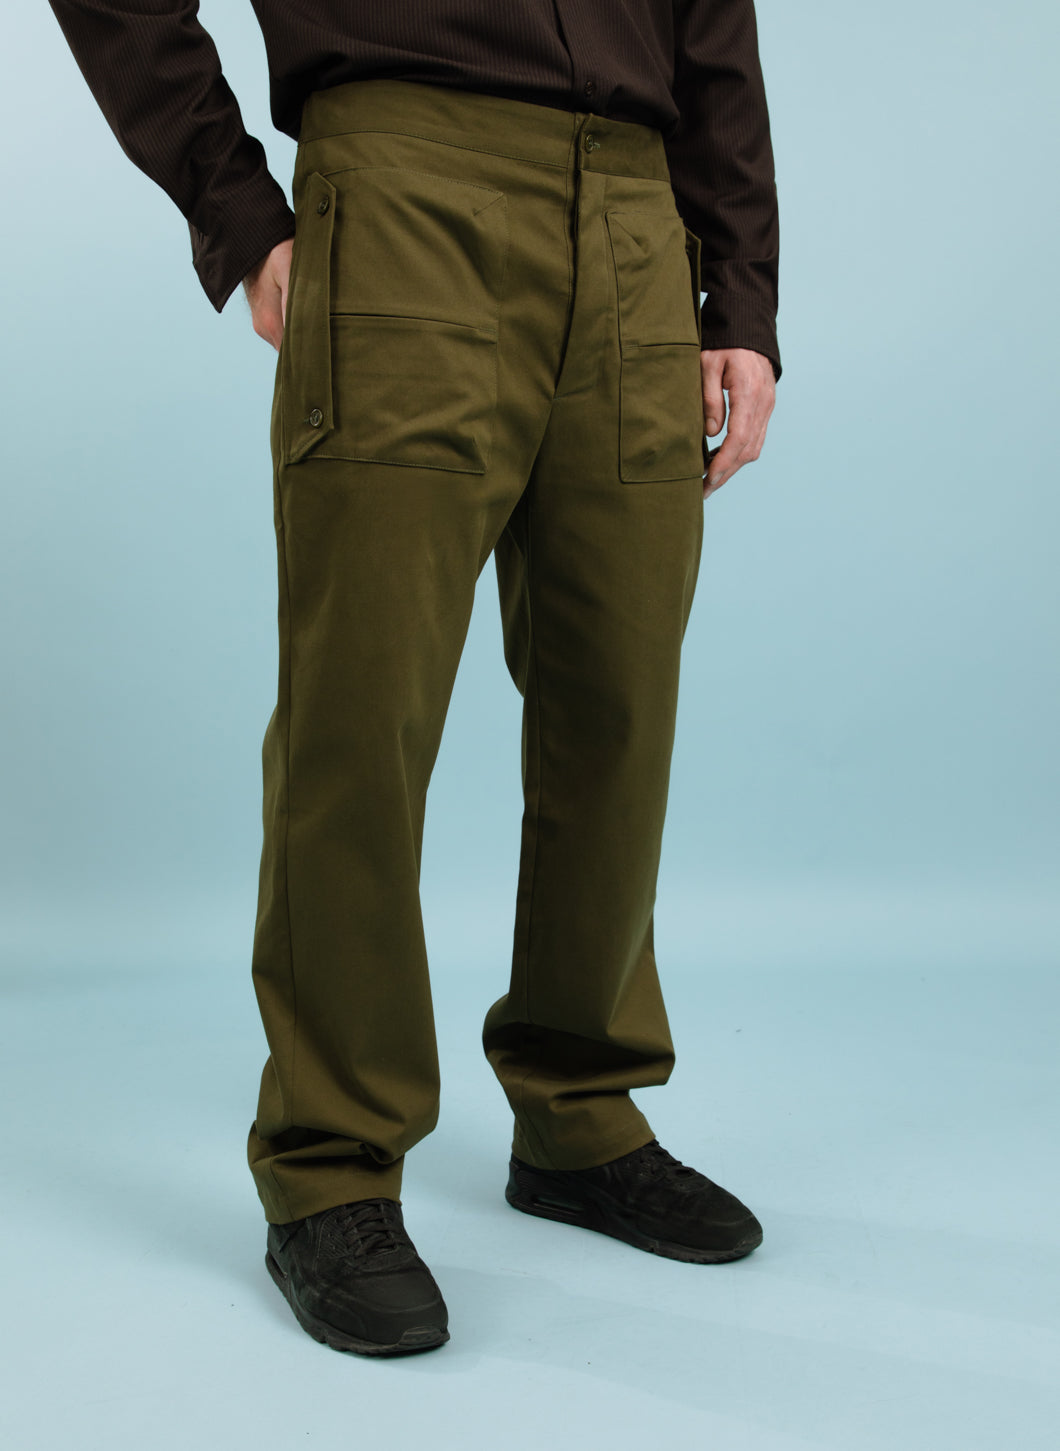 Pants with Envelope Pockets in Olive Satin Cotton